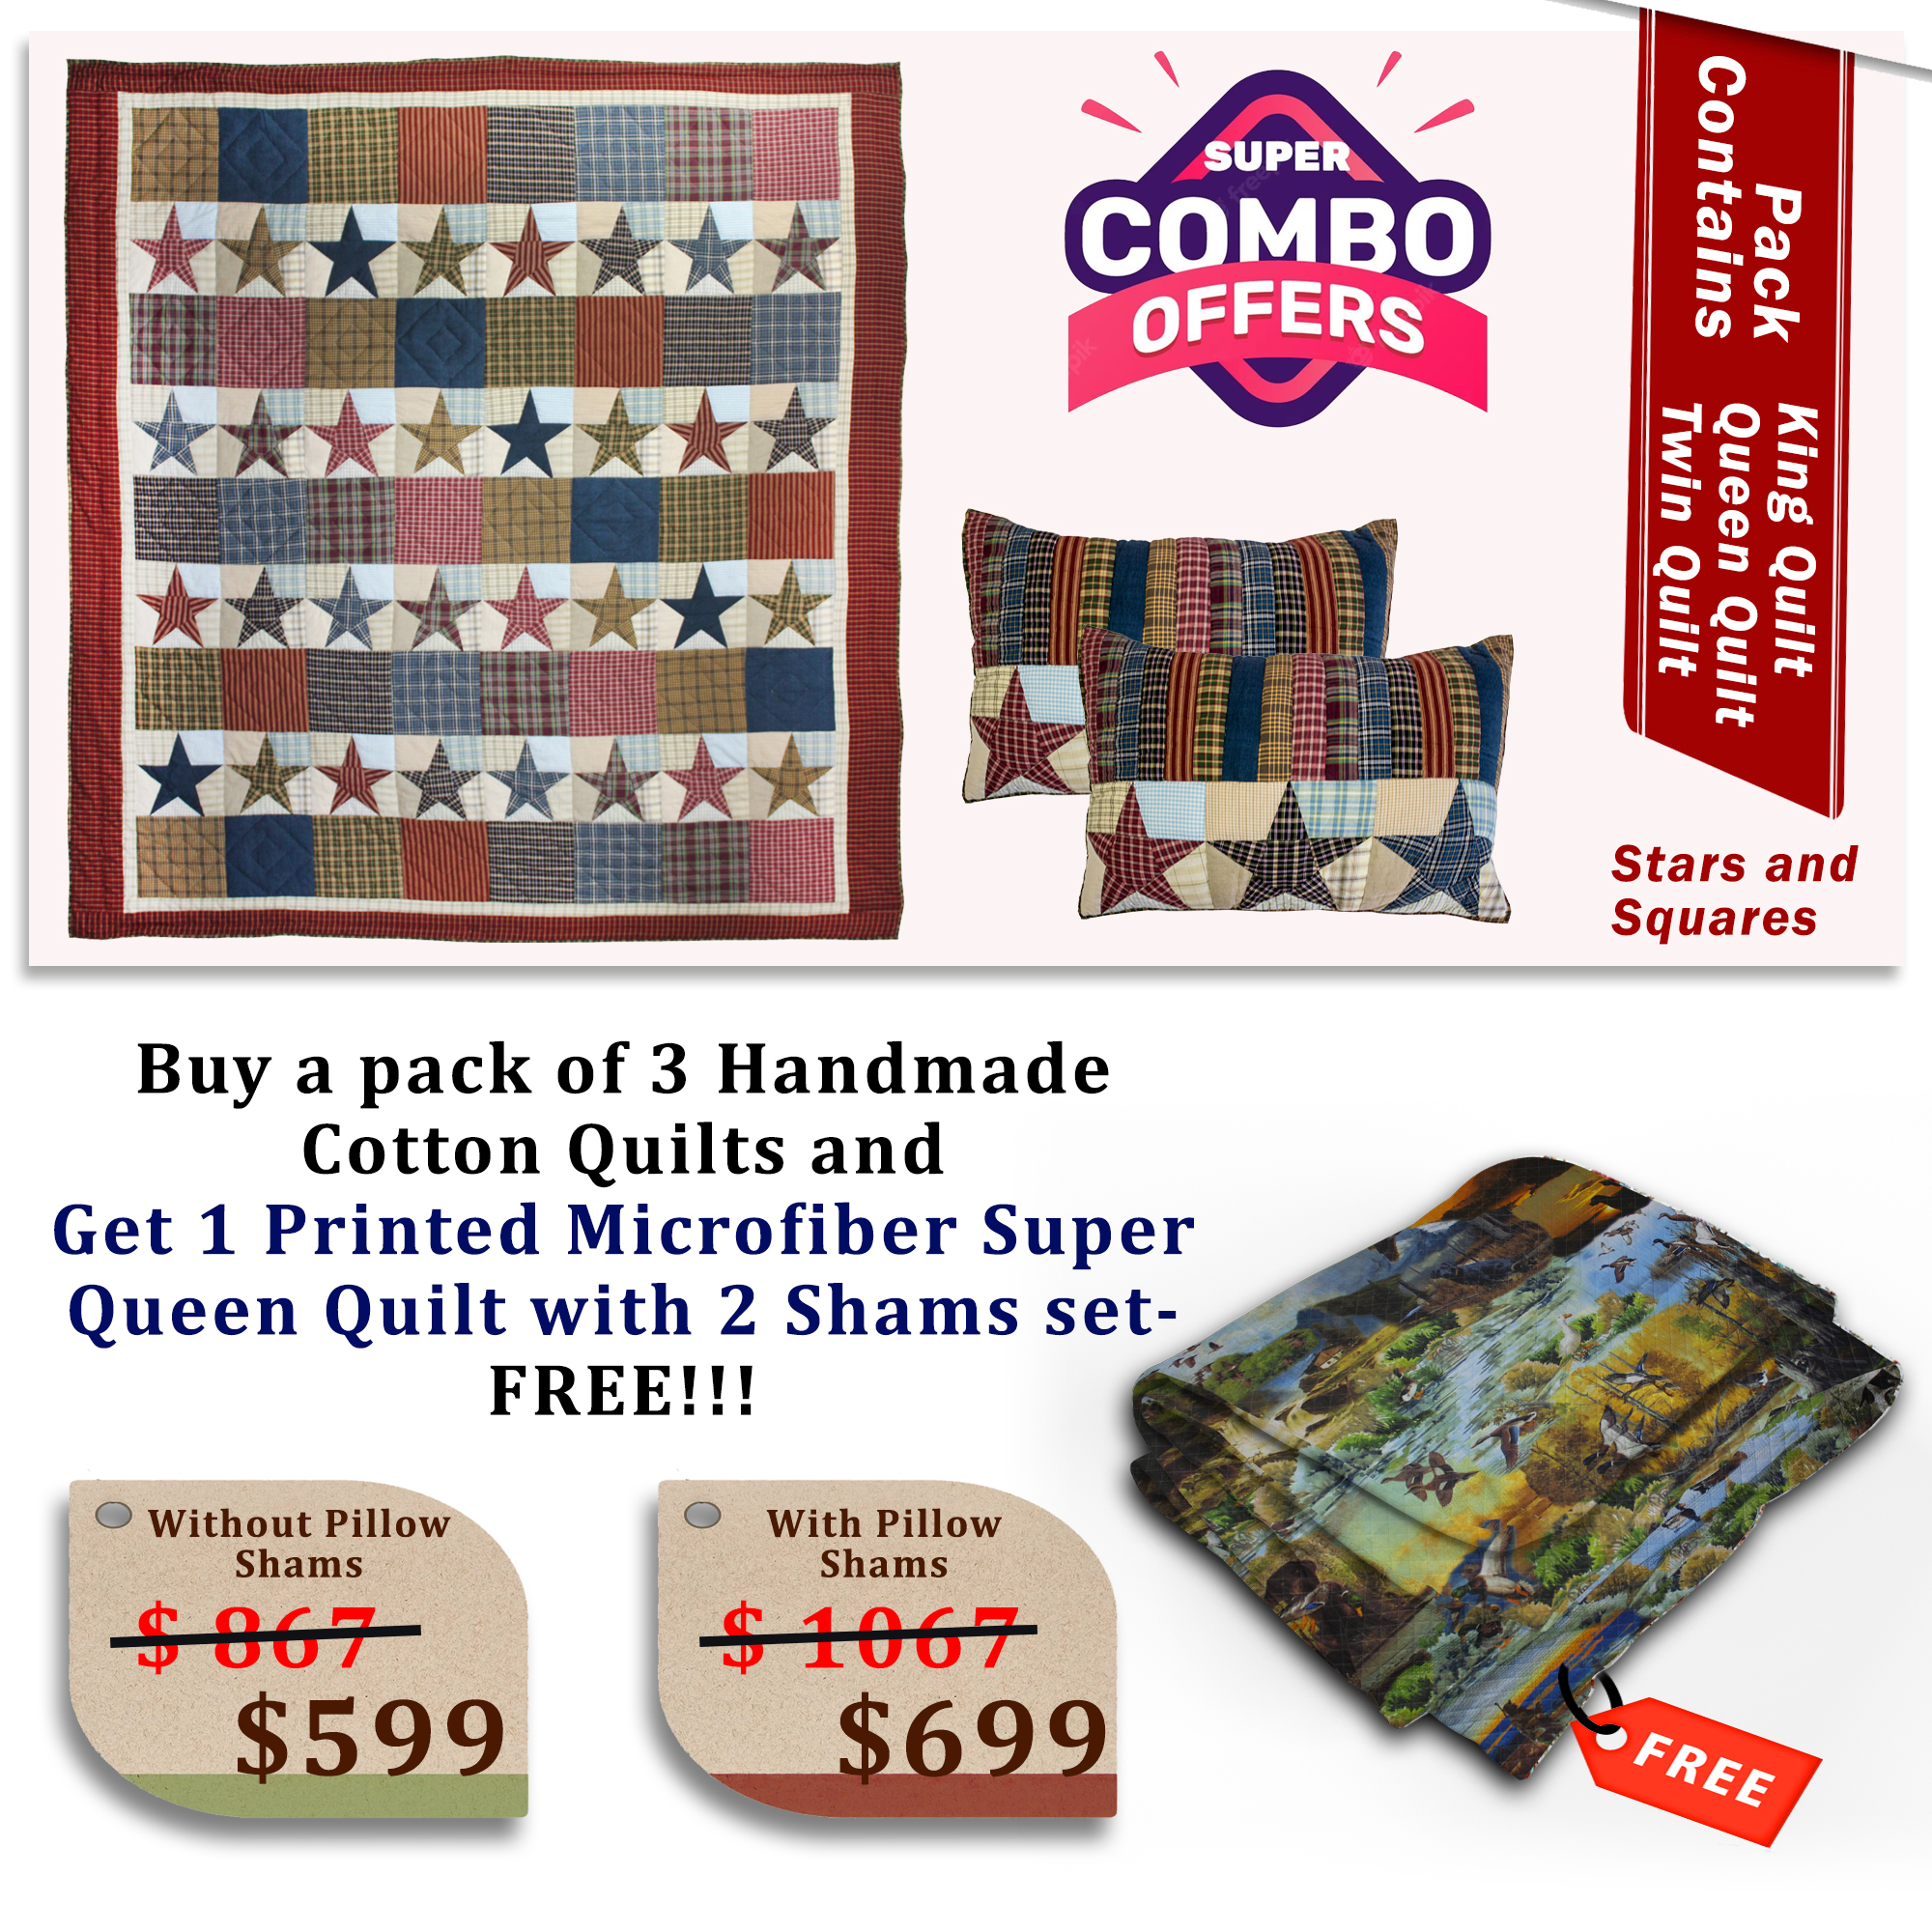 Stars and Squares - Handmade Cotton quilts  | Buy 3 cotton quilts and get 1 Printed Microfiber Super Queen Quilt with 2 Shams set FREE